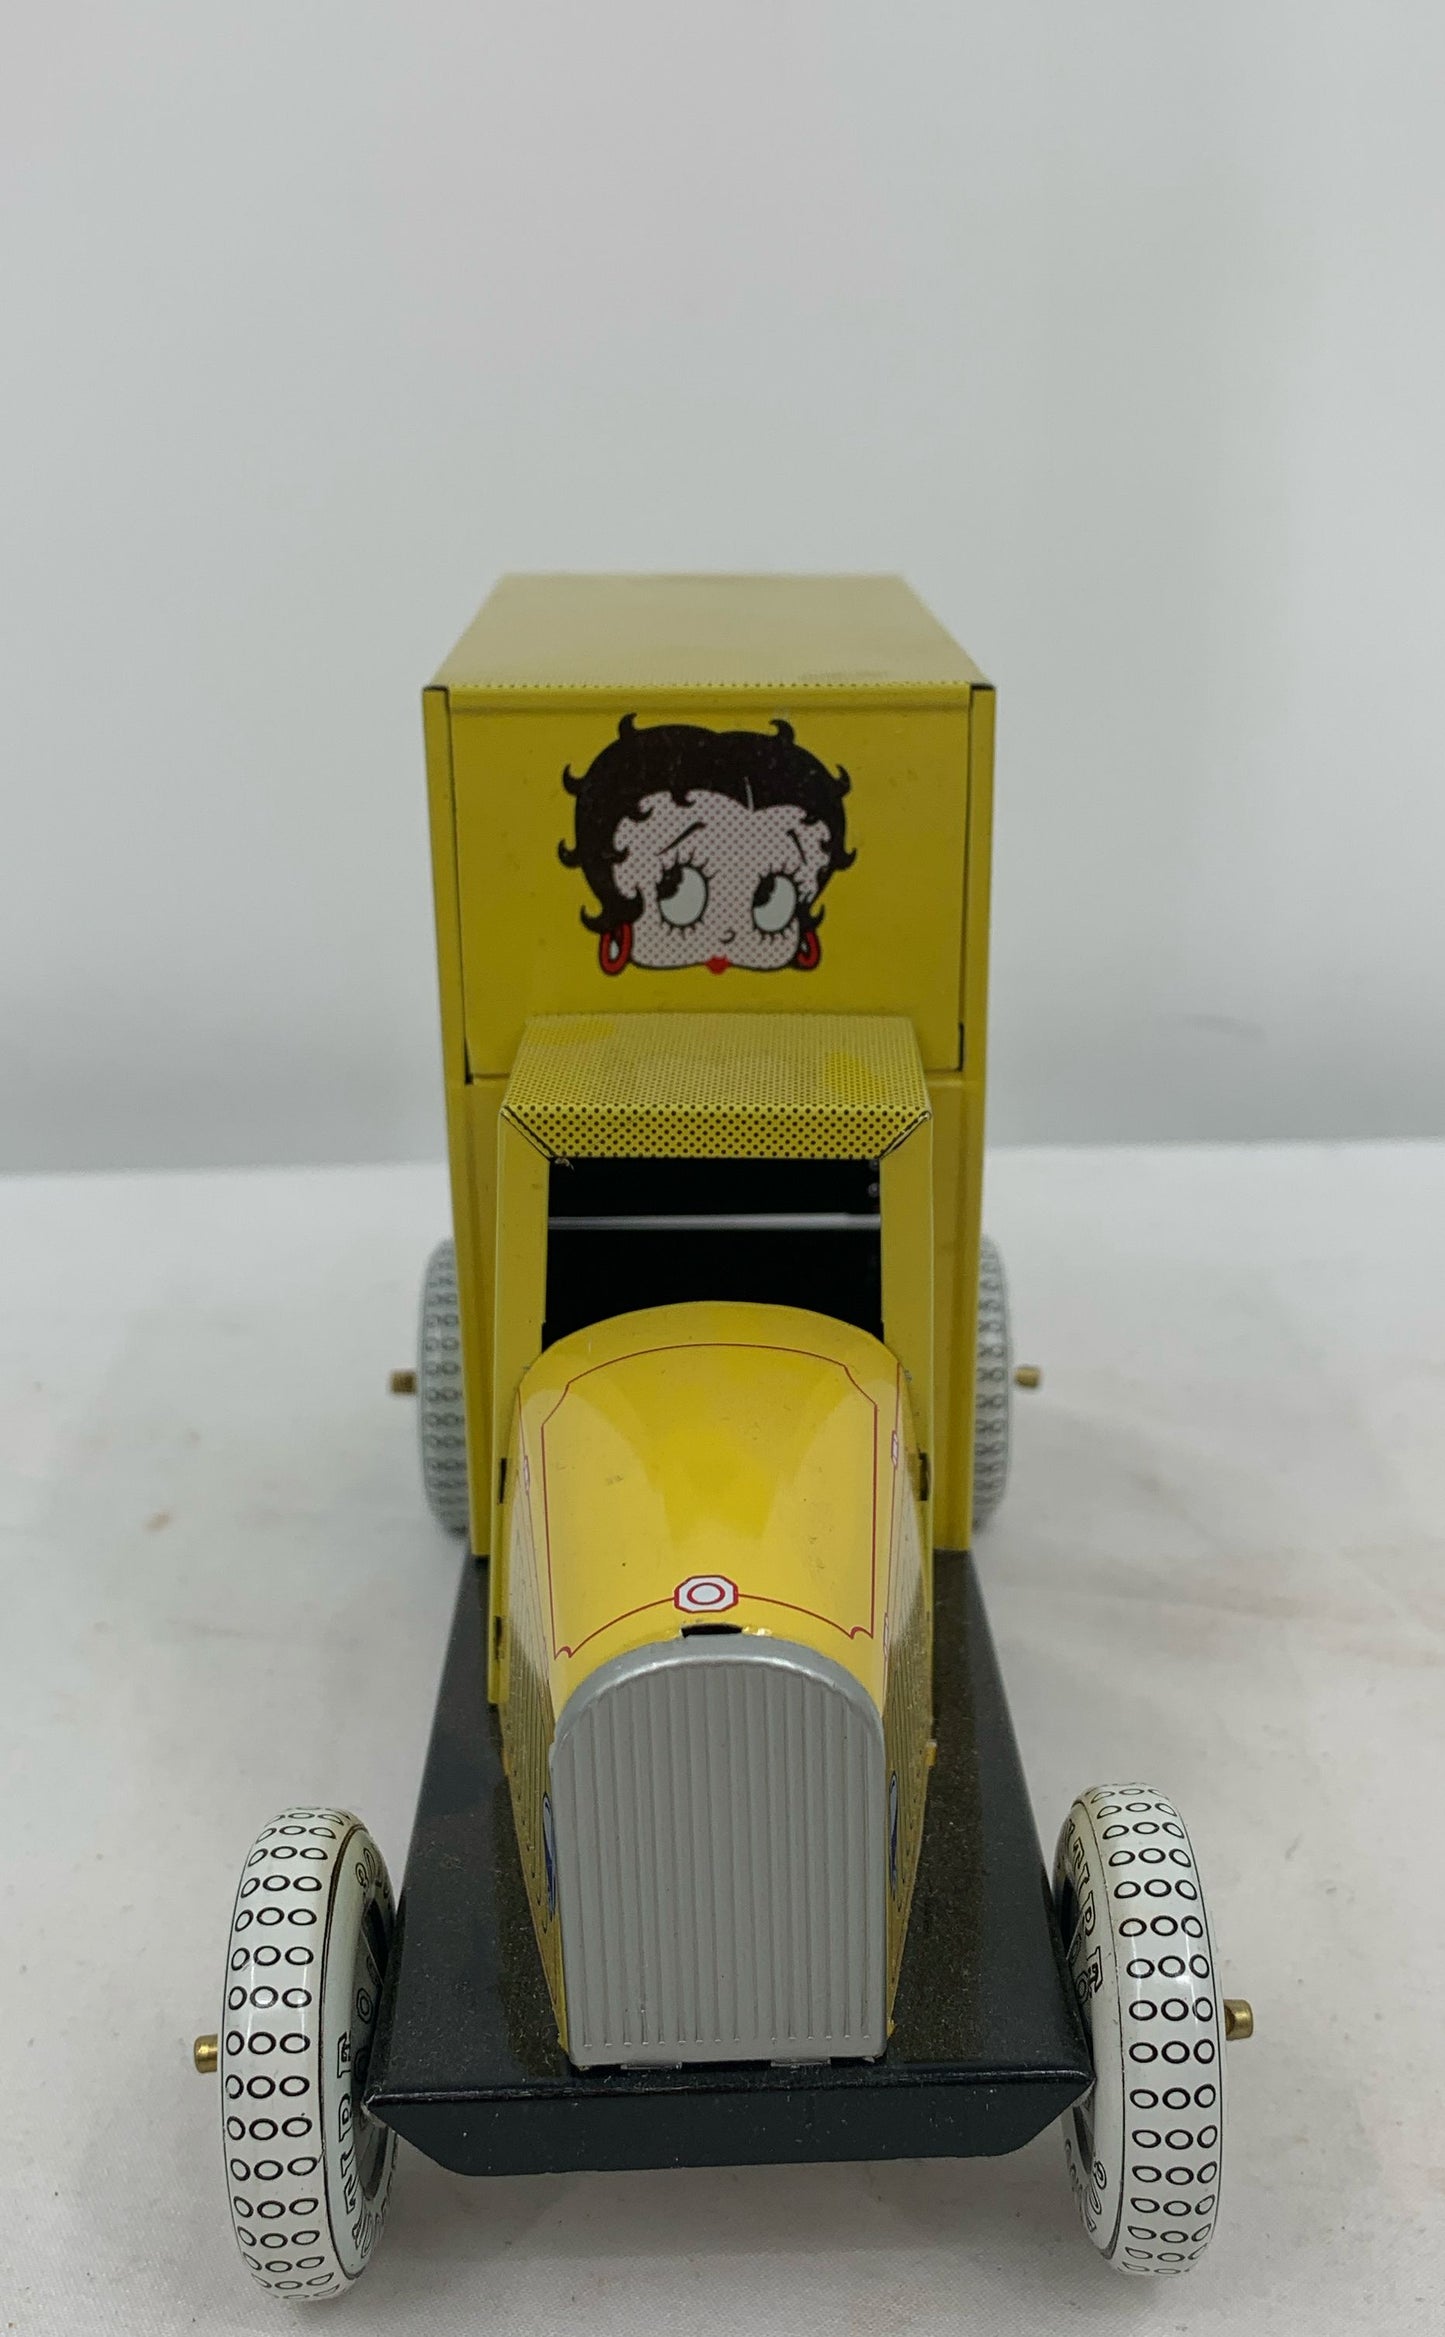 Vintage Betty Boop Lingerie Schylling Tin Delivery Truck Collector Series 1990